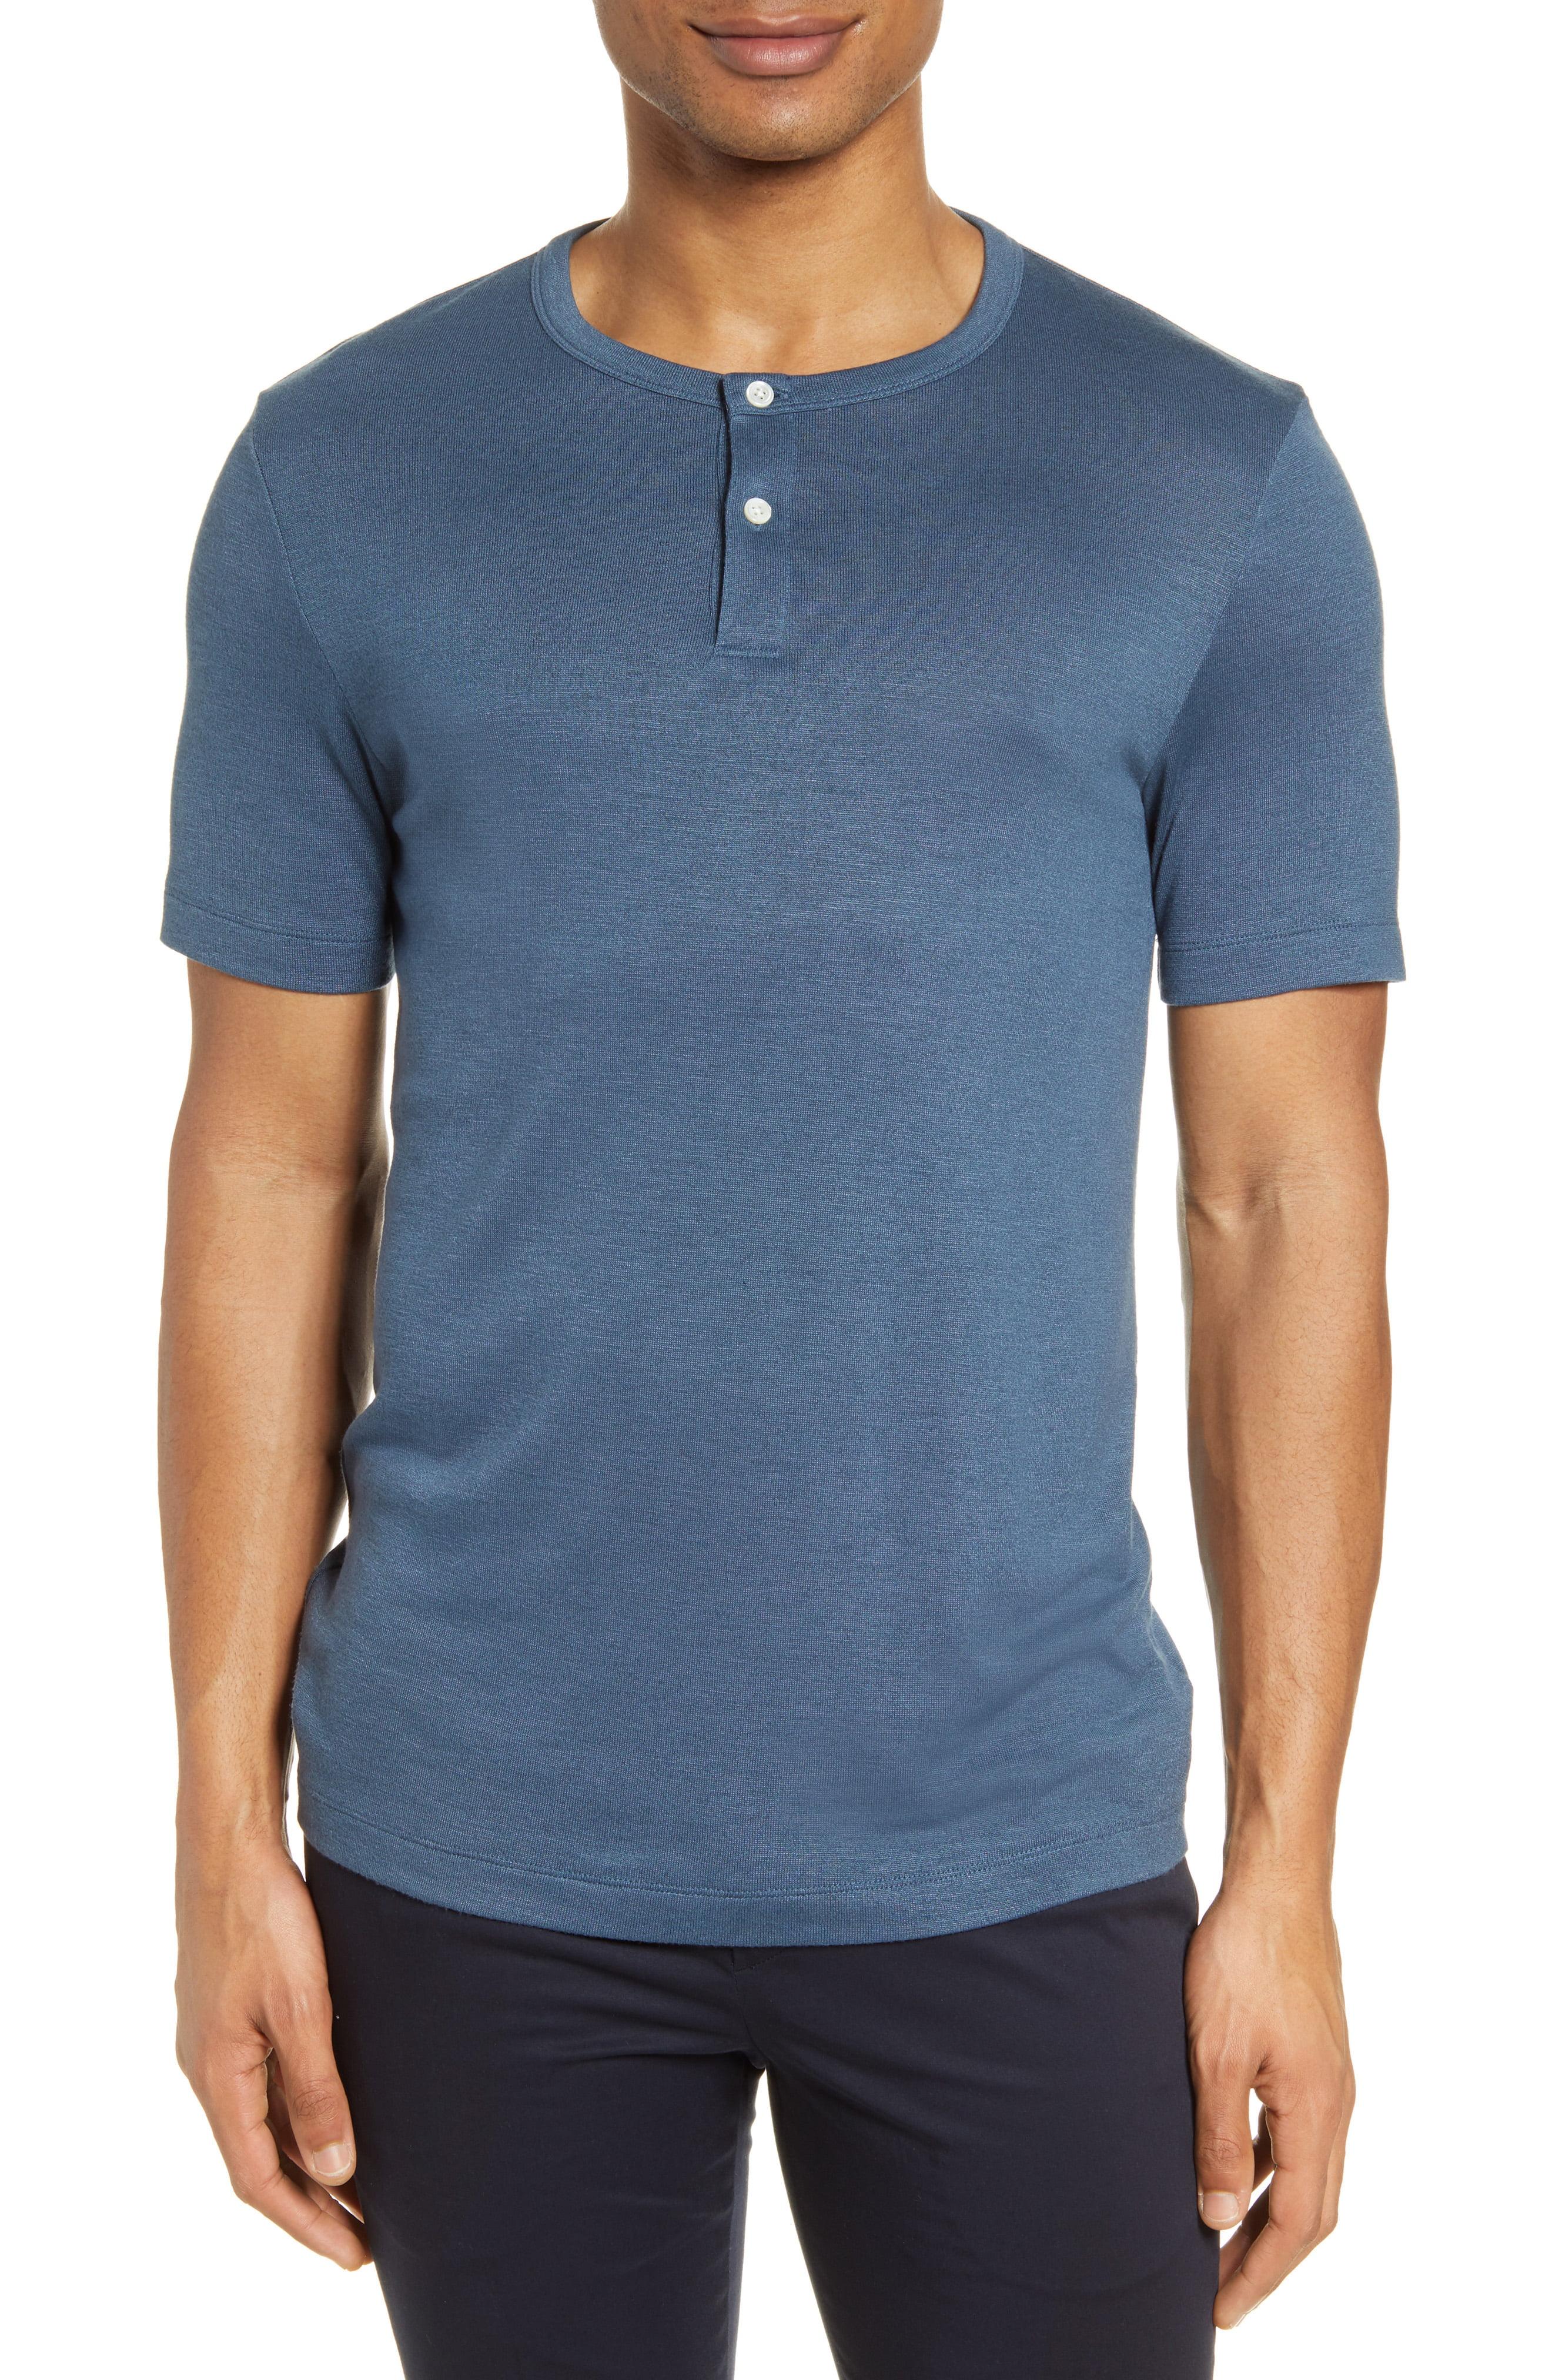 Theory Gaskell Slim Fit Short Sleeve Henley in Blue for Men - Lyst